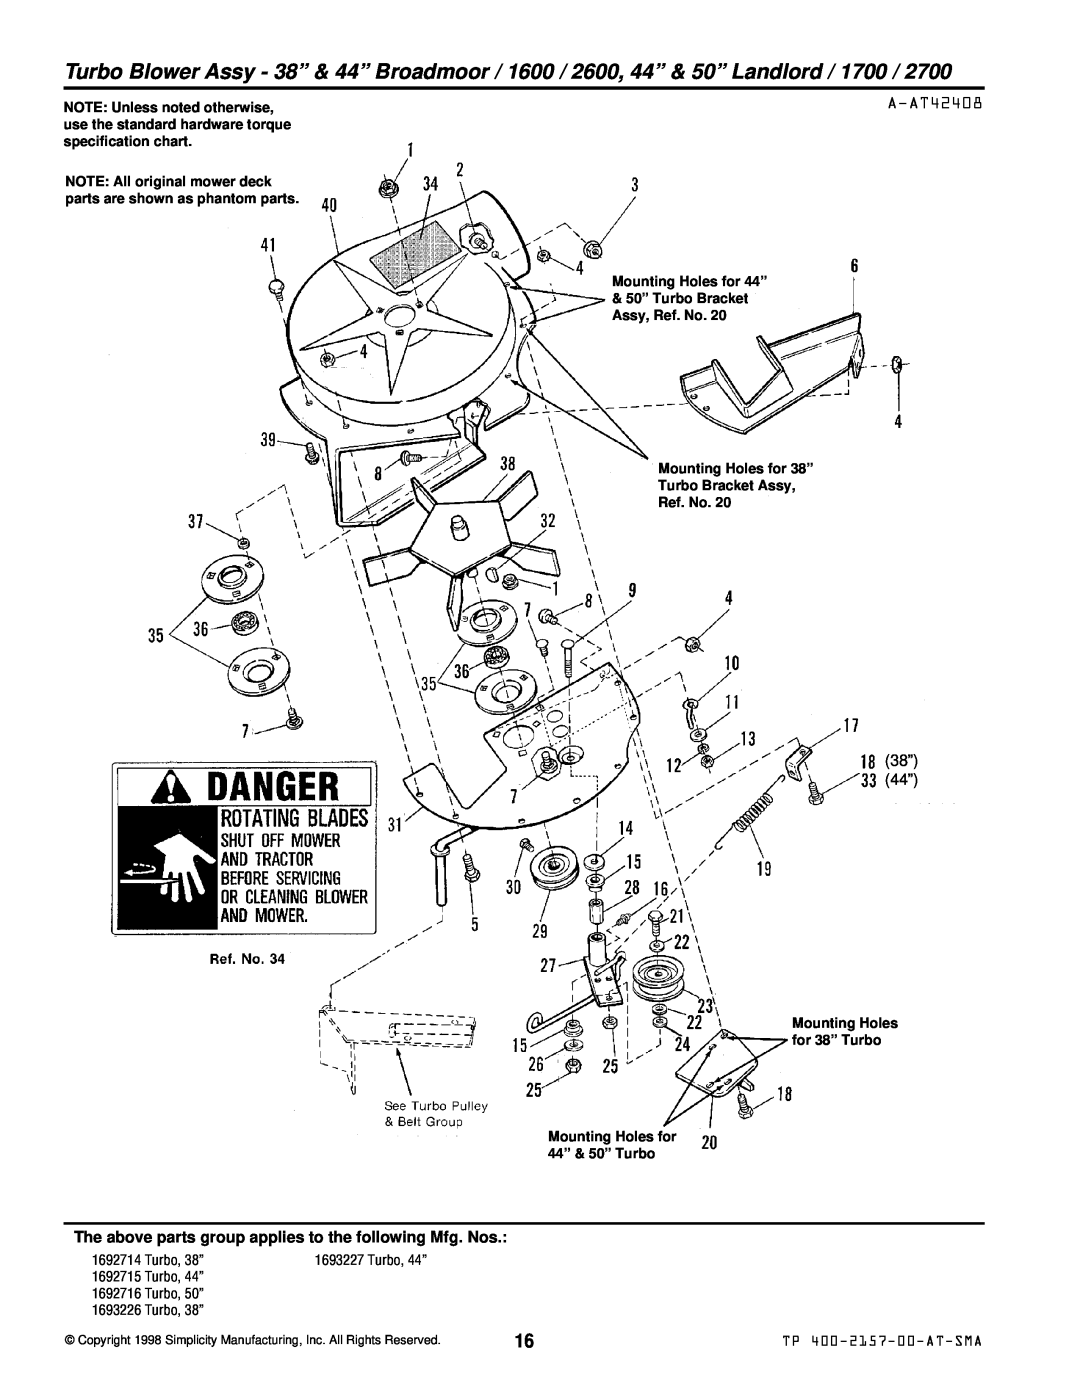 Simplicity 1692858 A-AT42408, The above parts group applies to the following Mfg. Nos, TP 400-2157-00-AT-SMA, Turbo, 44” 